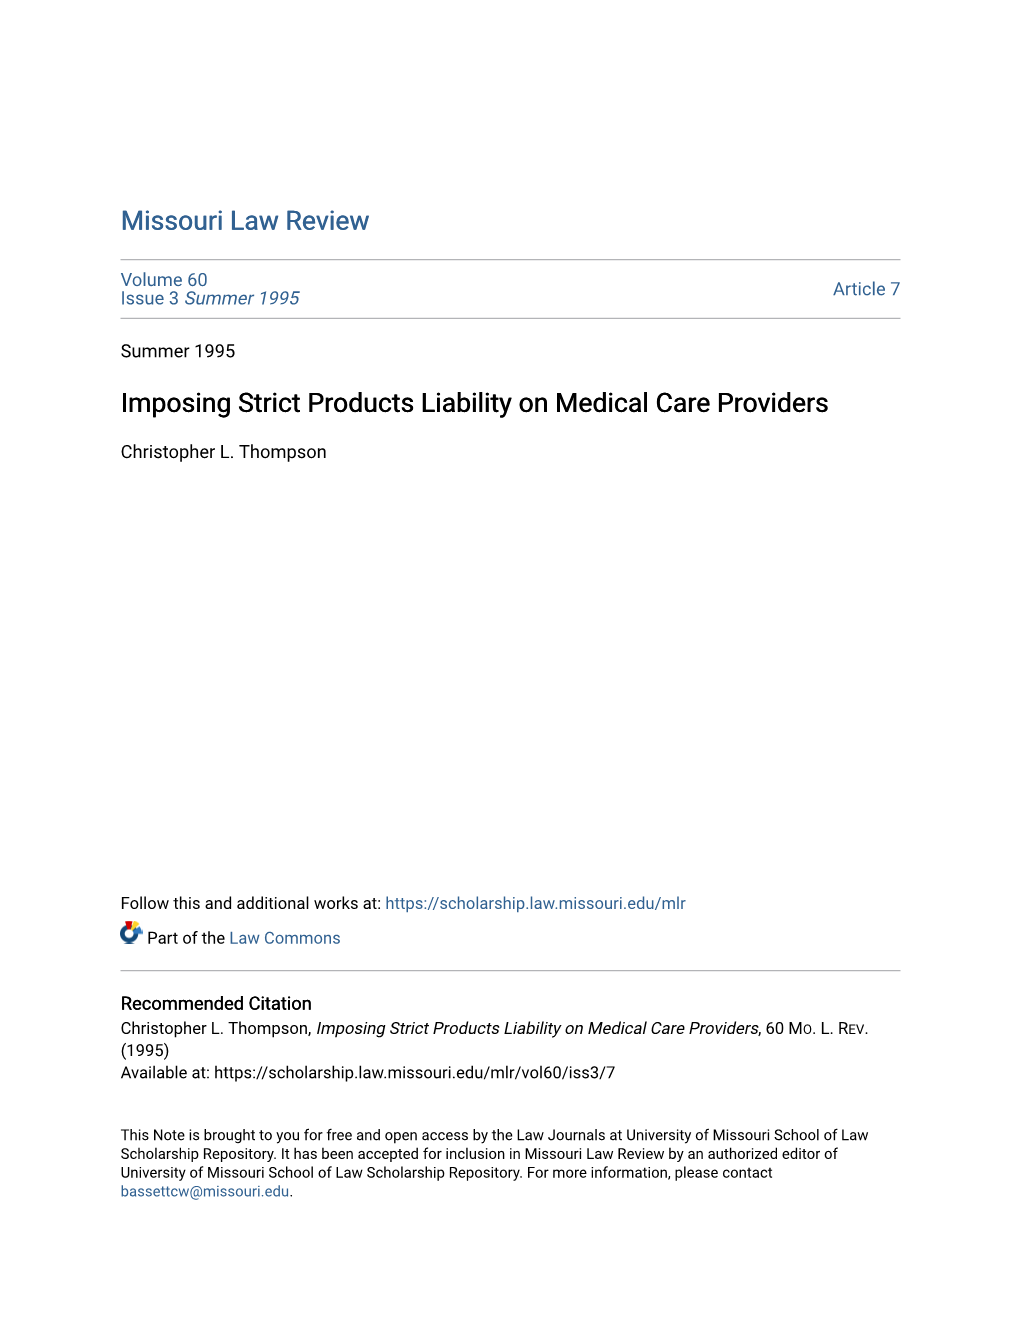 Imposing Strict Products Liability on Medical Care Providers